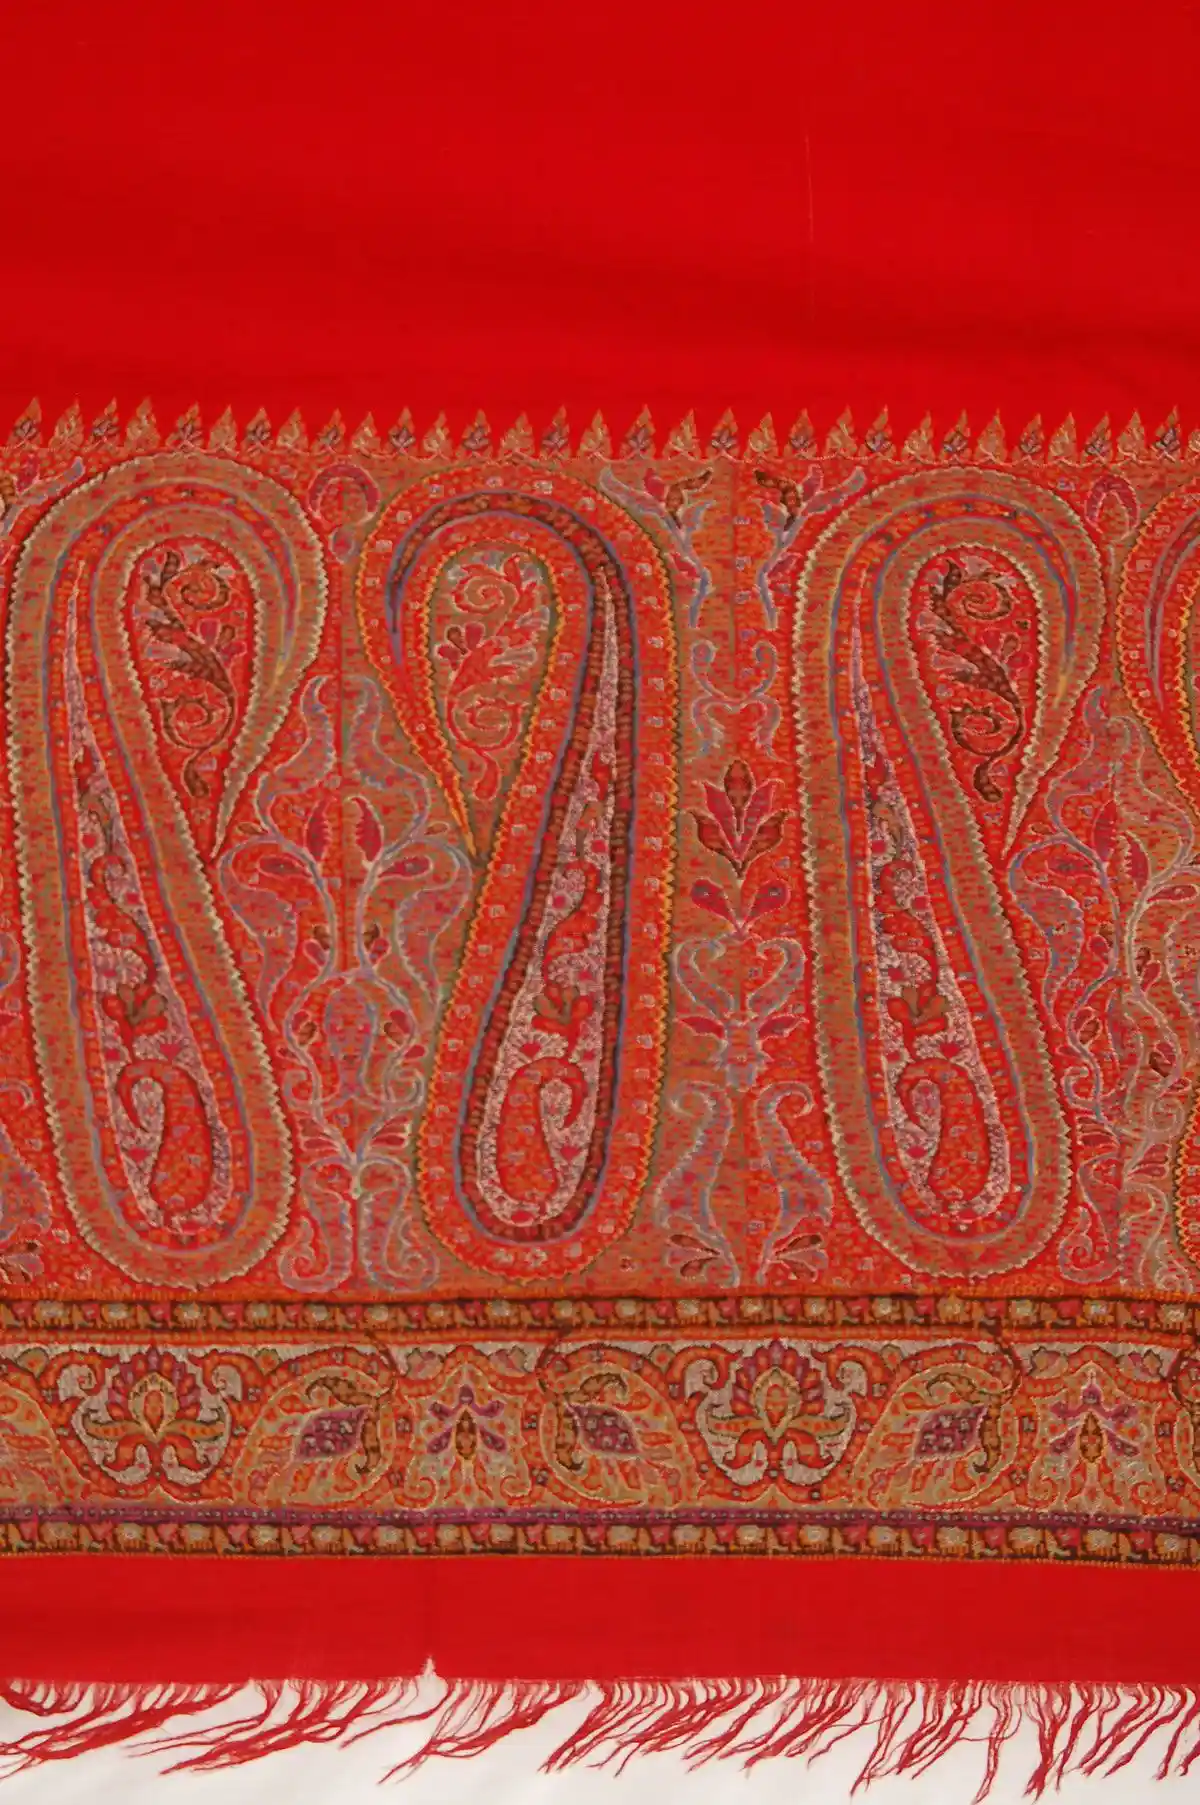  A Kashmiri Shawl in all its glory, Source: Google Images